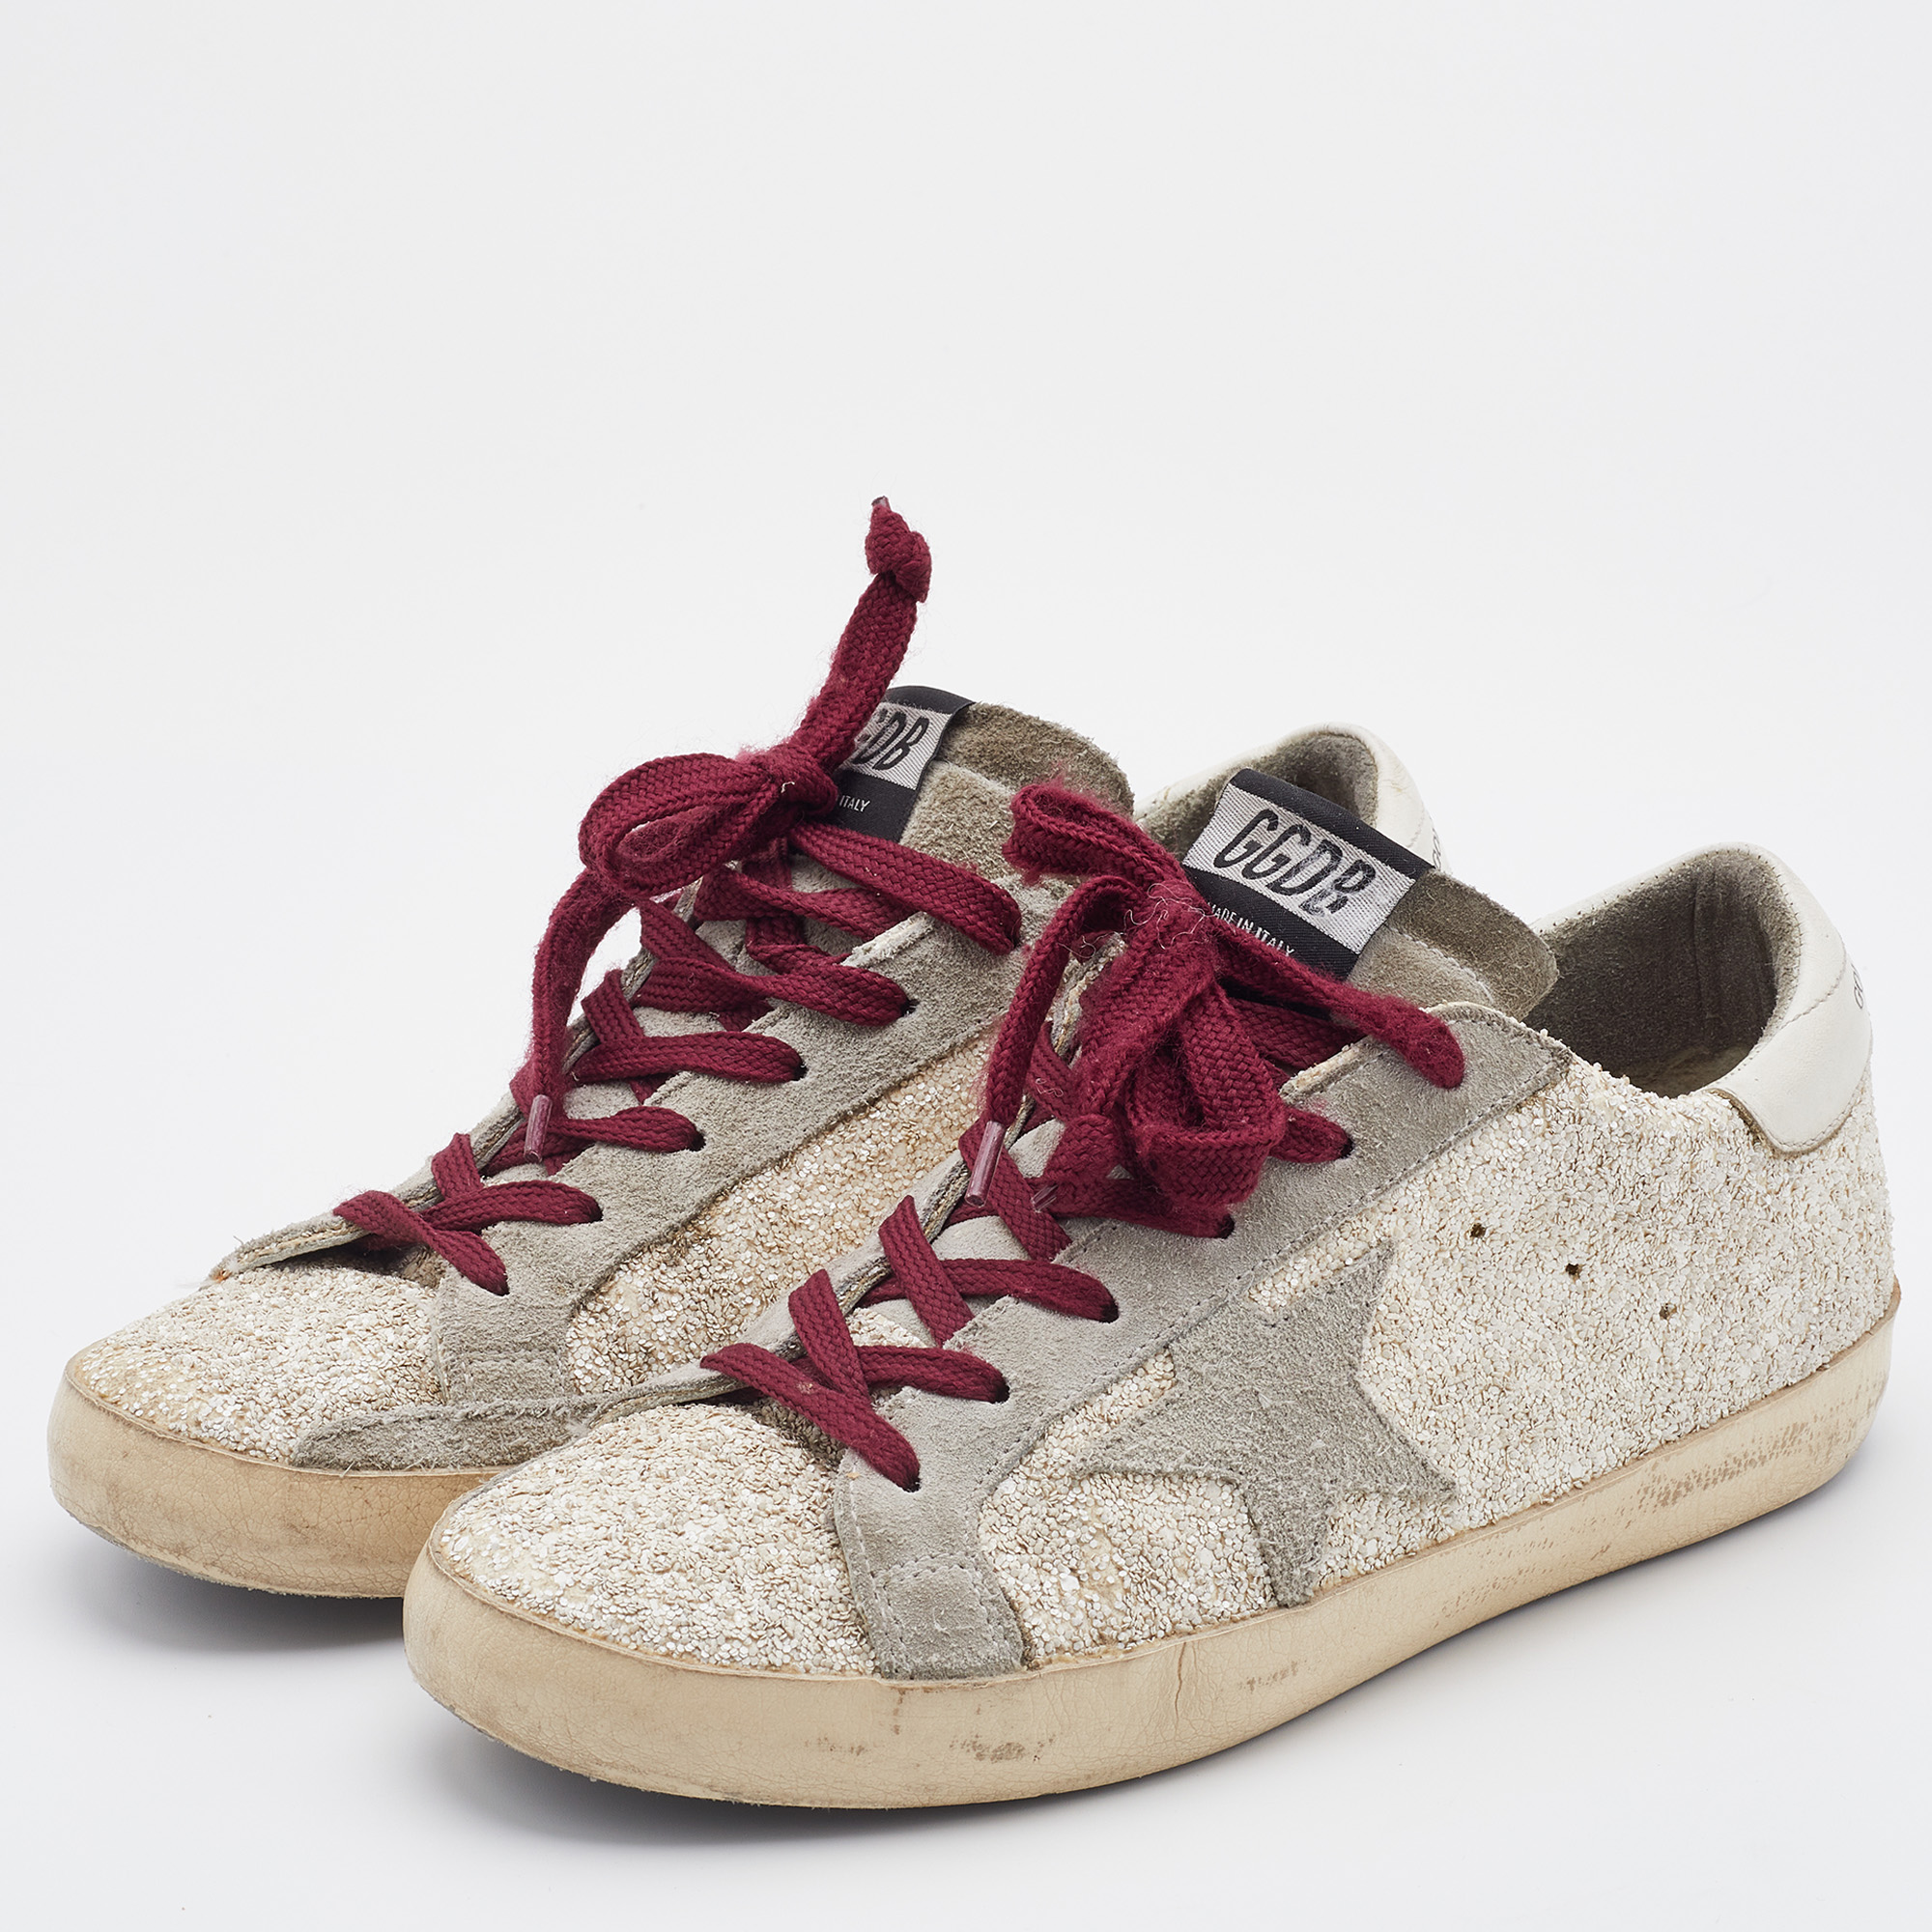 

Golden Goose Off-White/Grey Glitter and Suede Superstar Low Top Sneakers Size